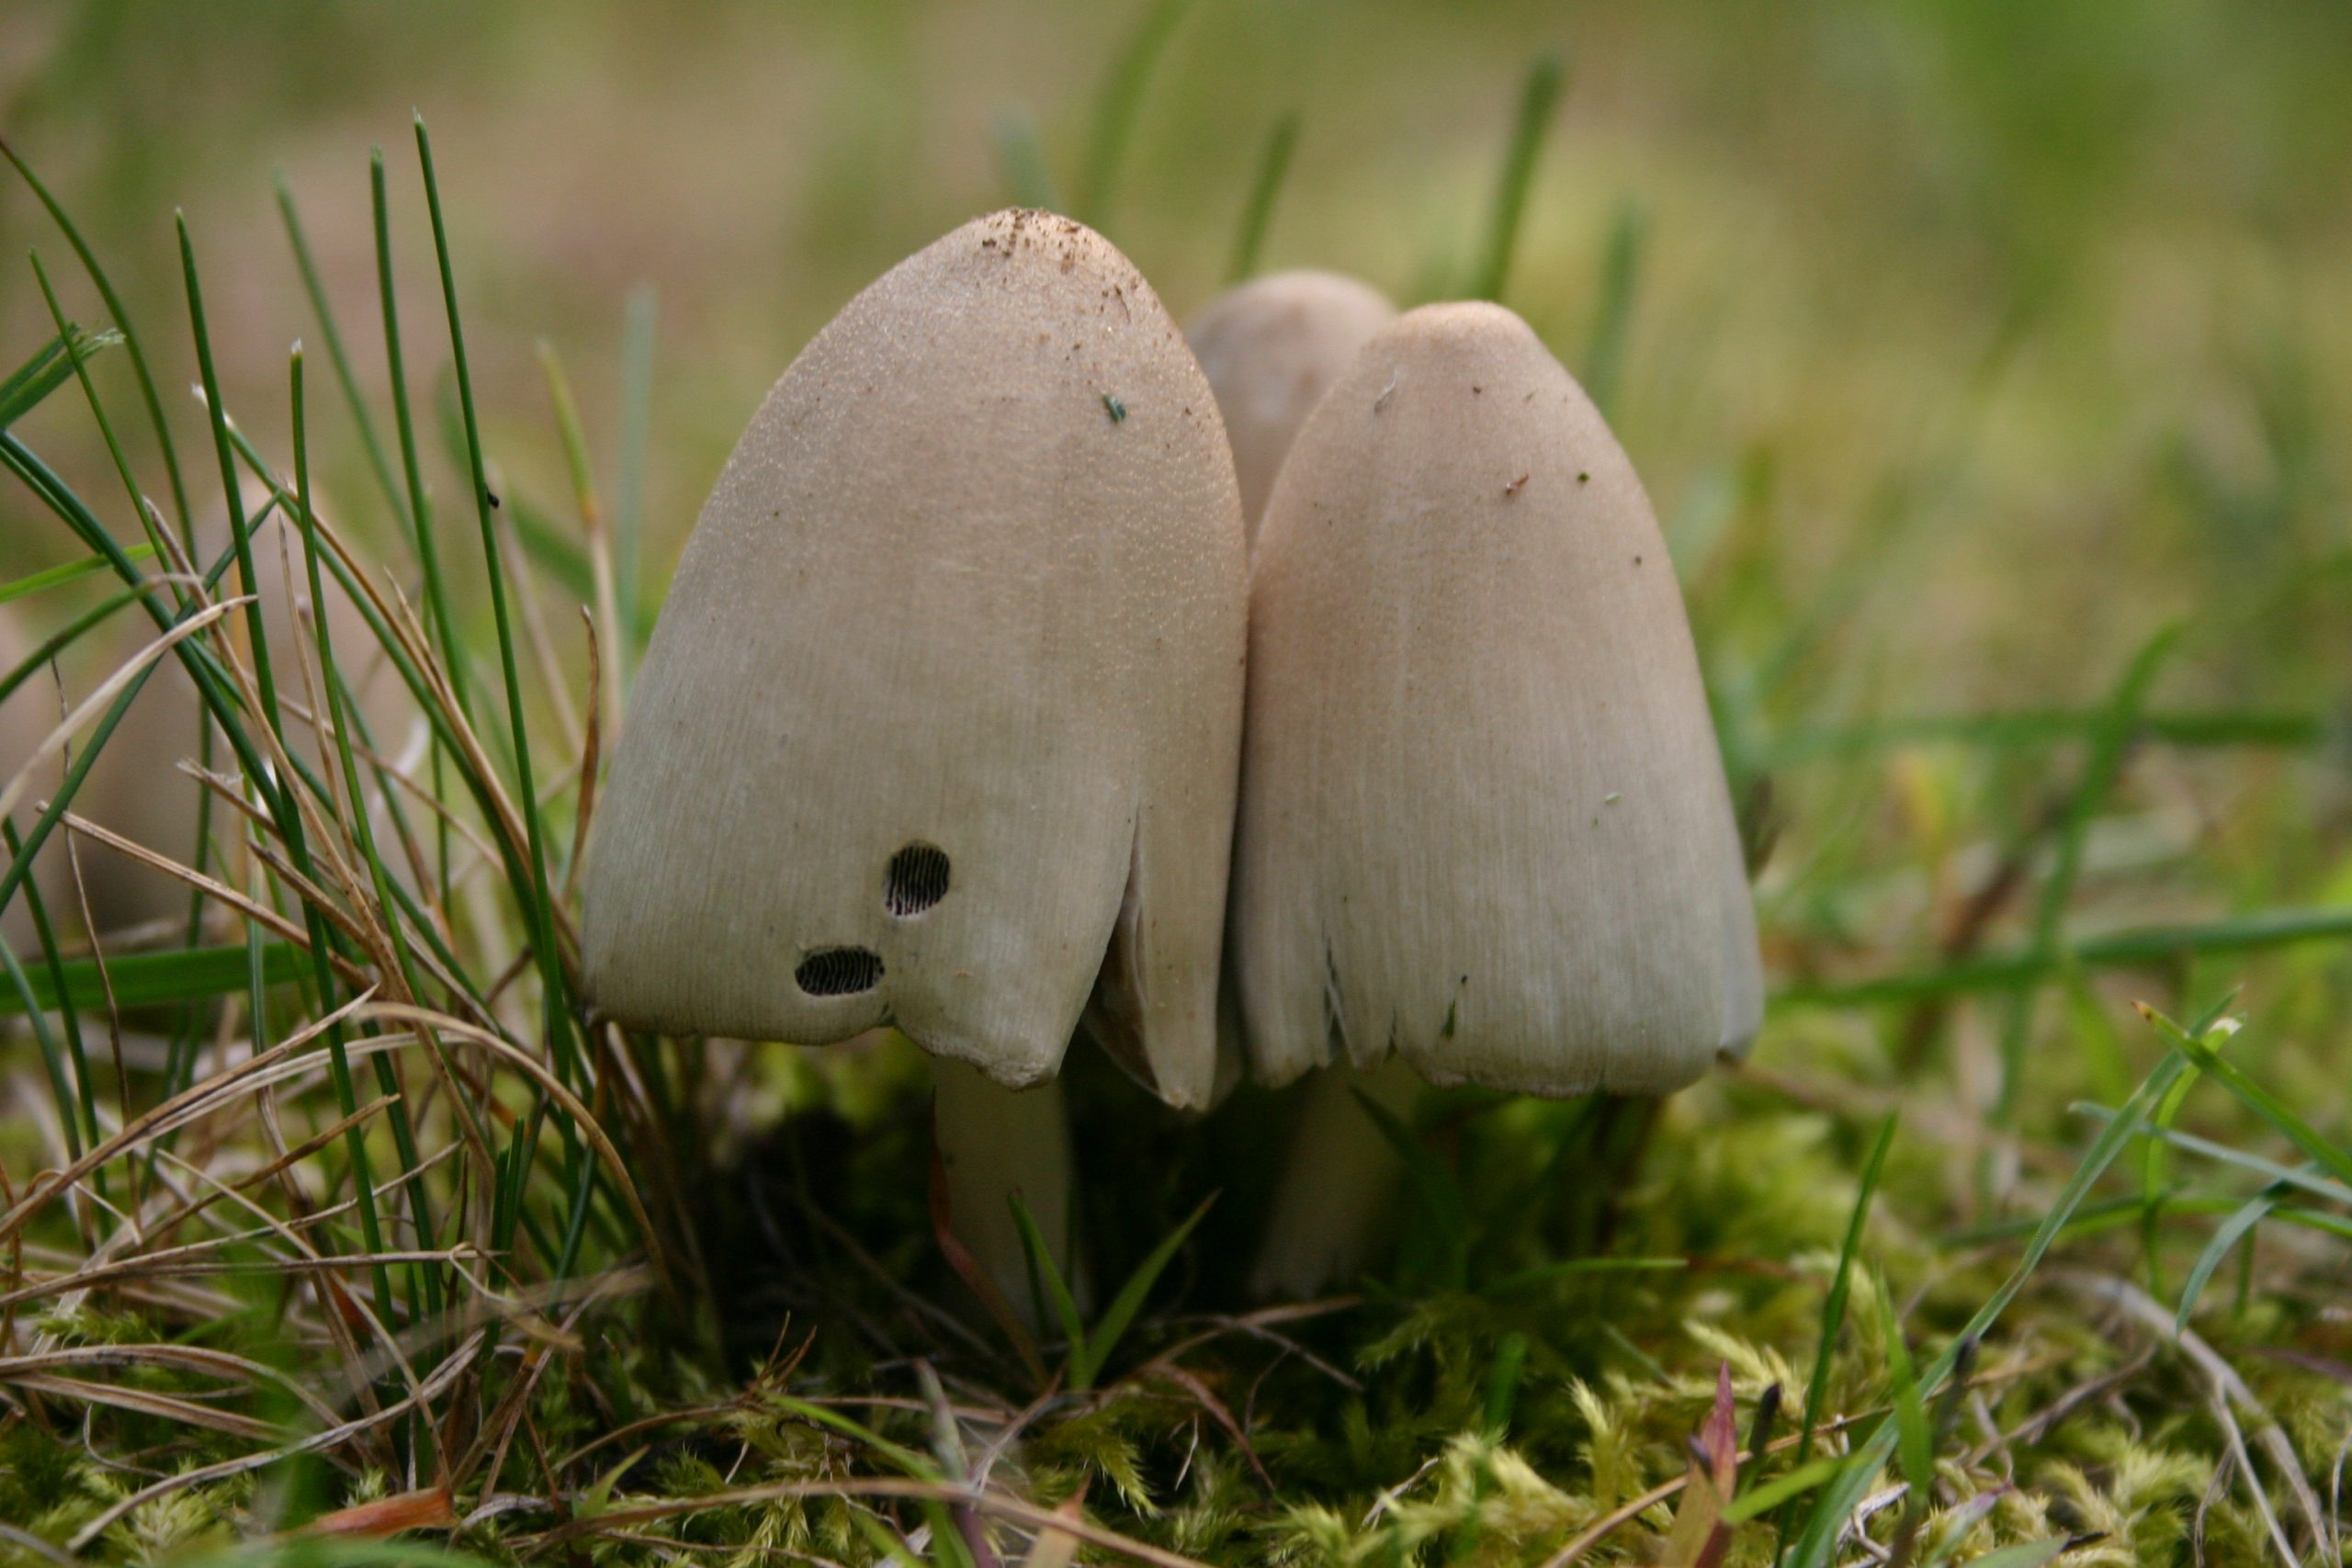 Fairy Tale Mushrooms (user submitted)